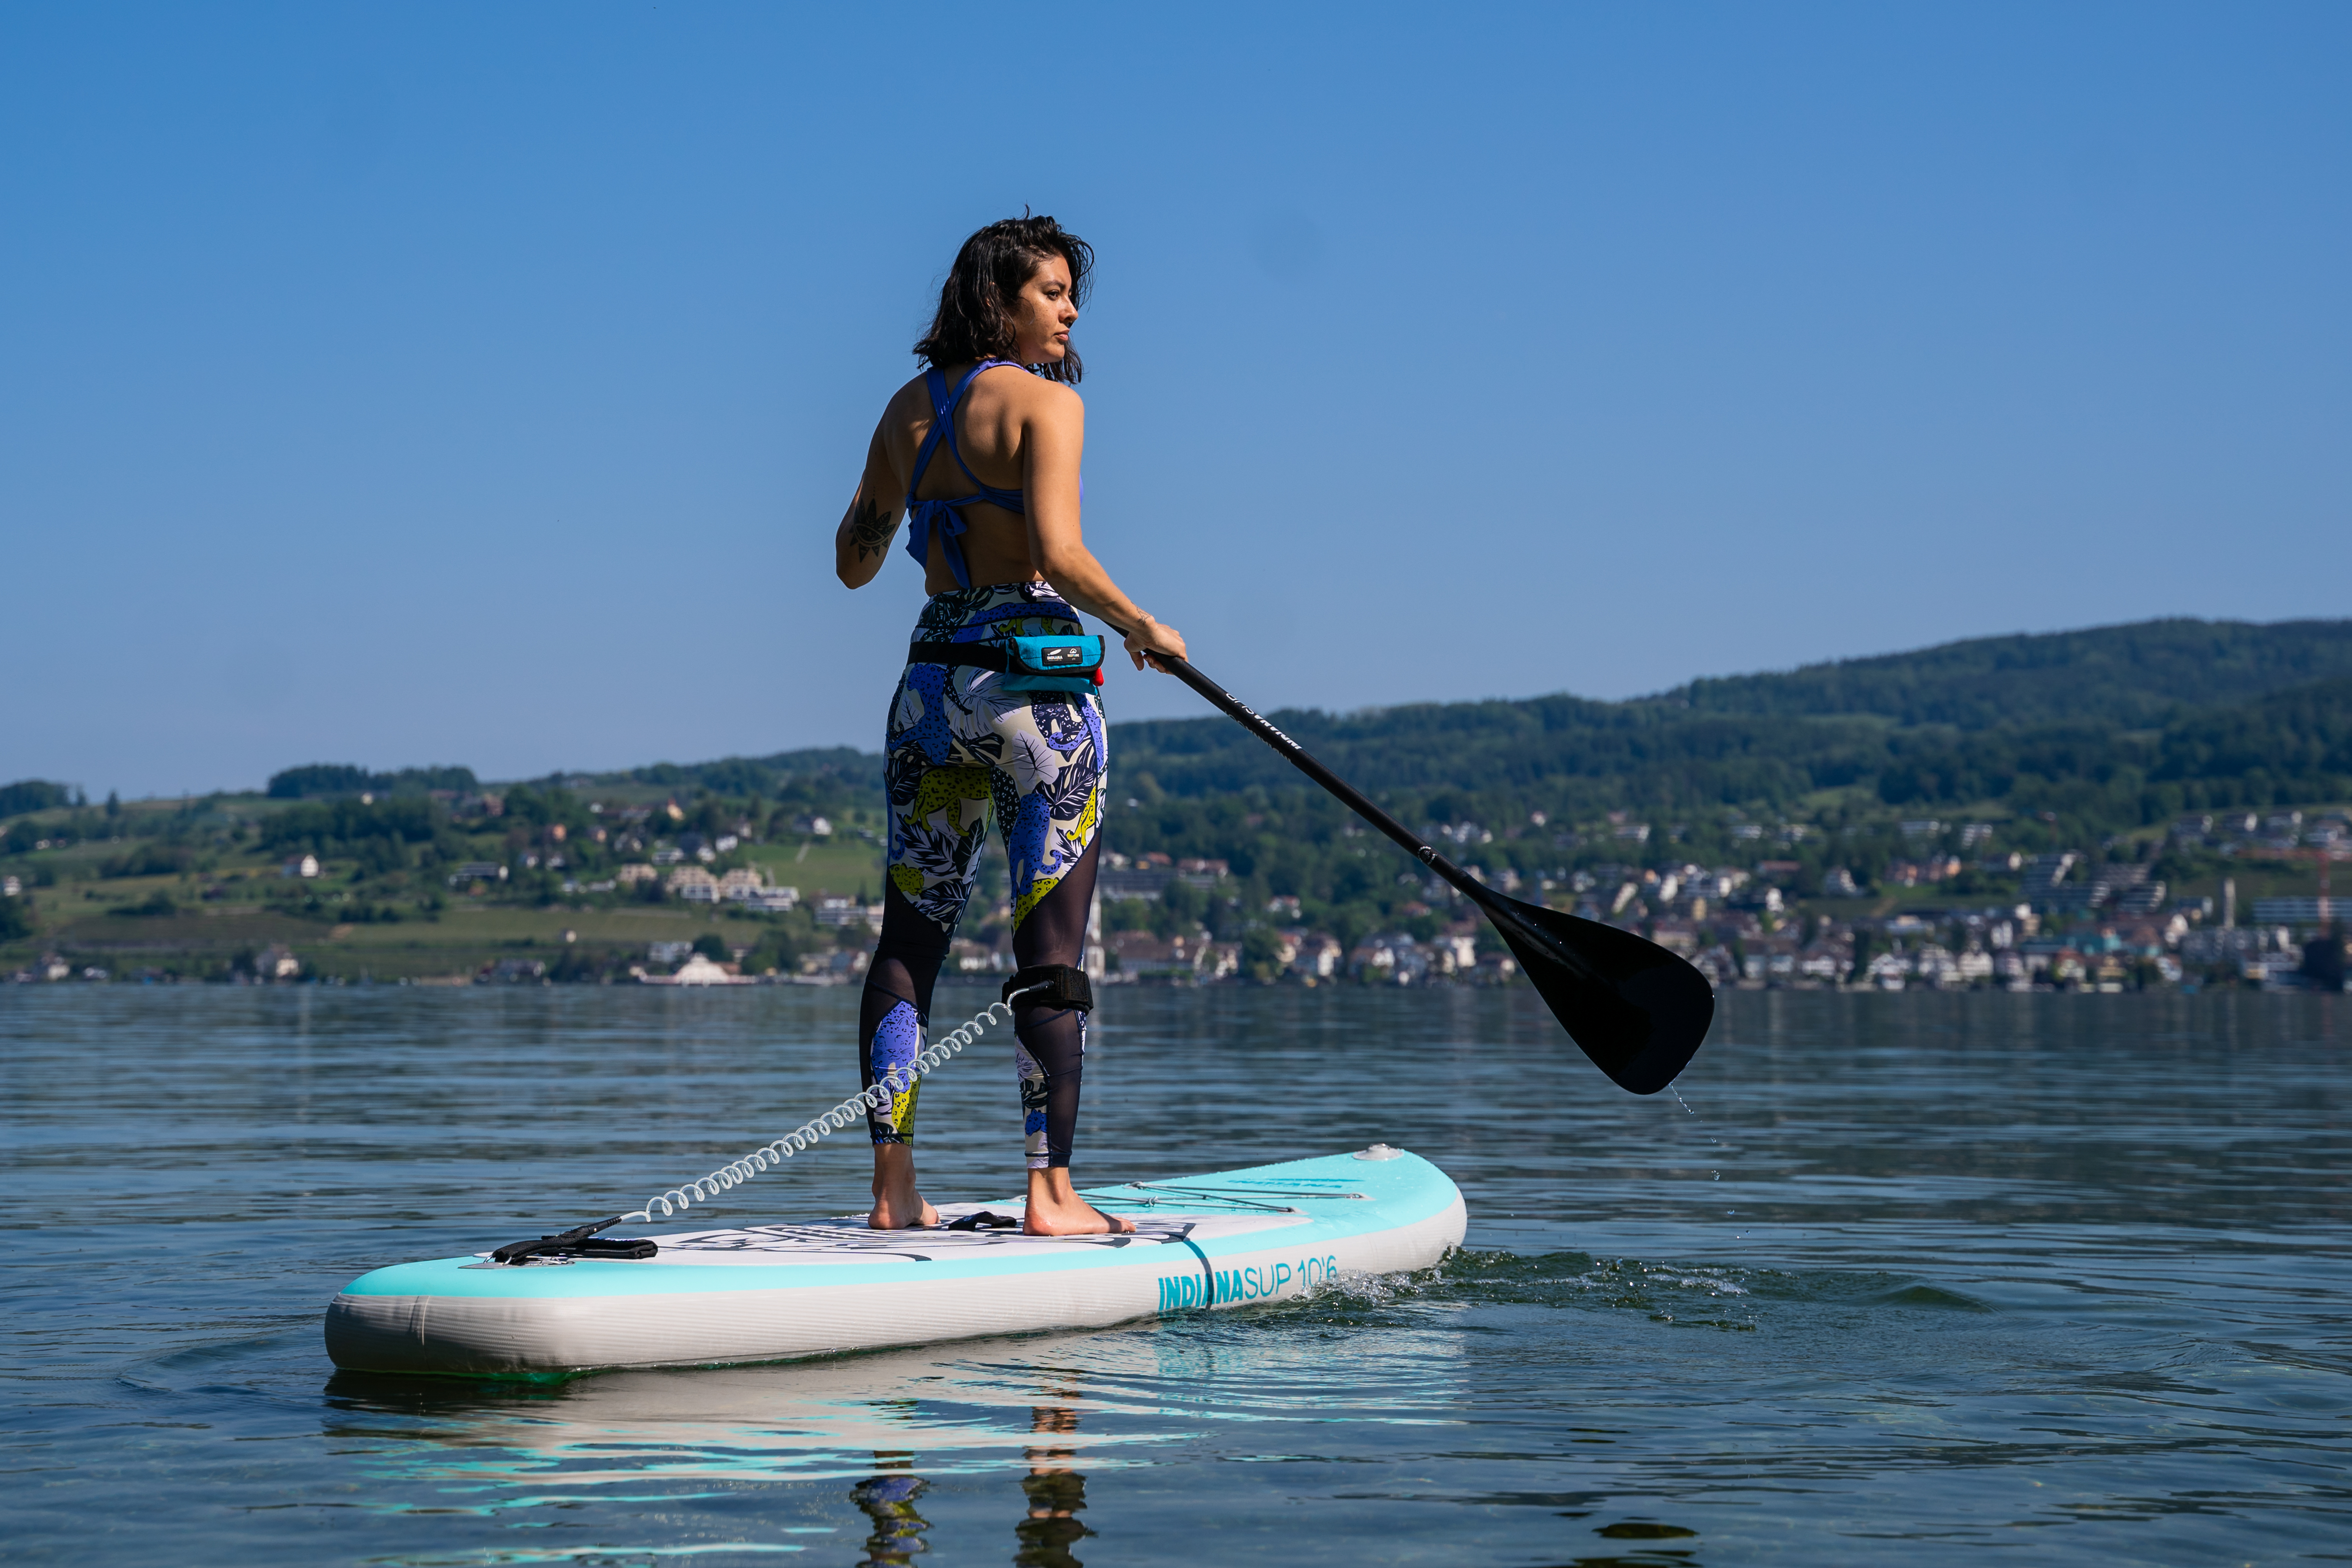 JOIN A SUP COURSE AT SEEBAD ENGE